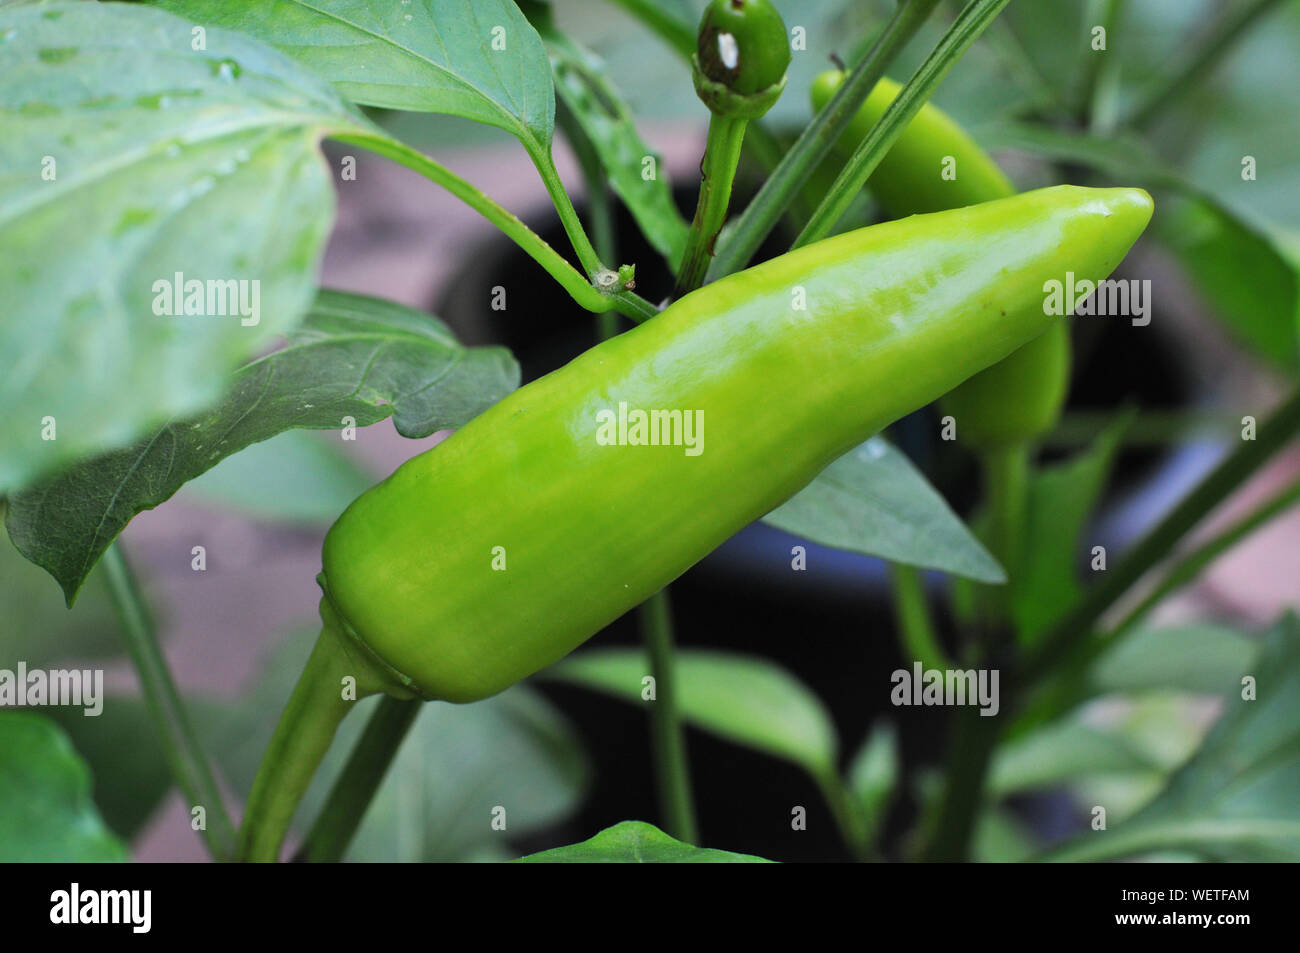 Green Hot Chili Peppers Growing Banque D'Images